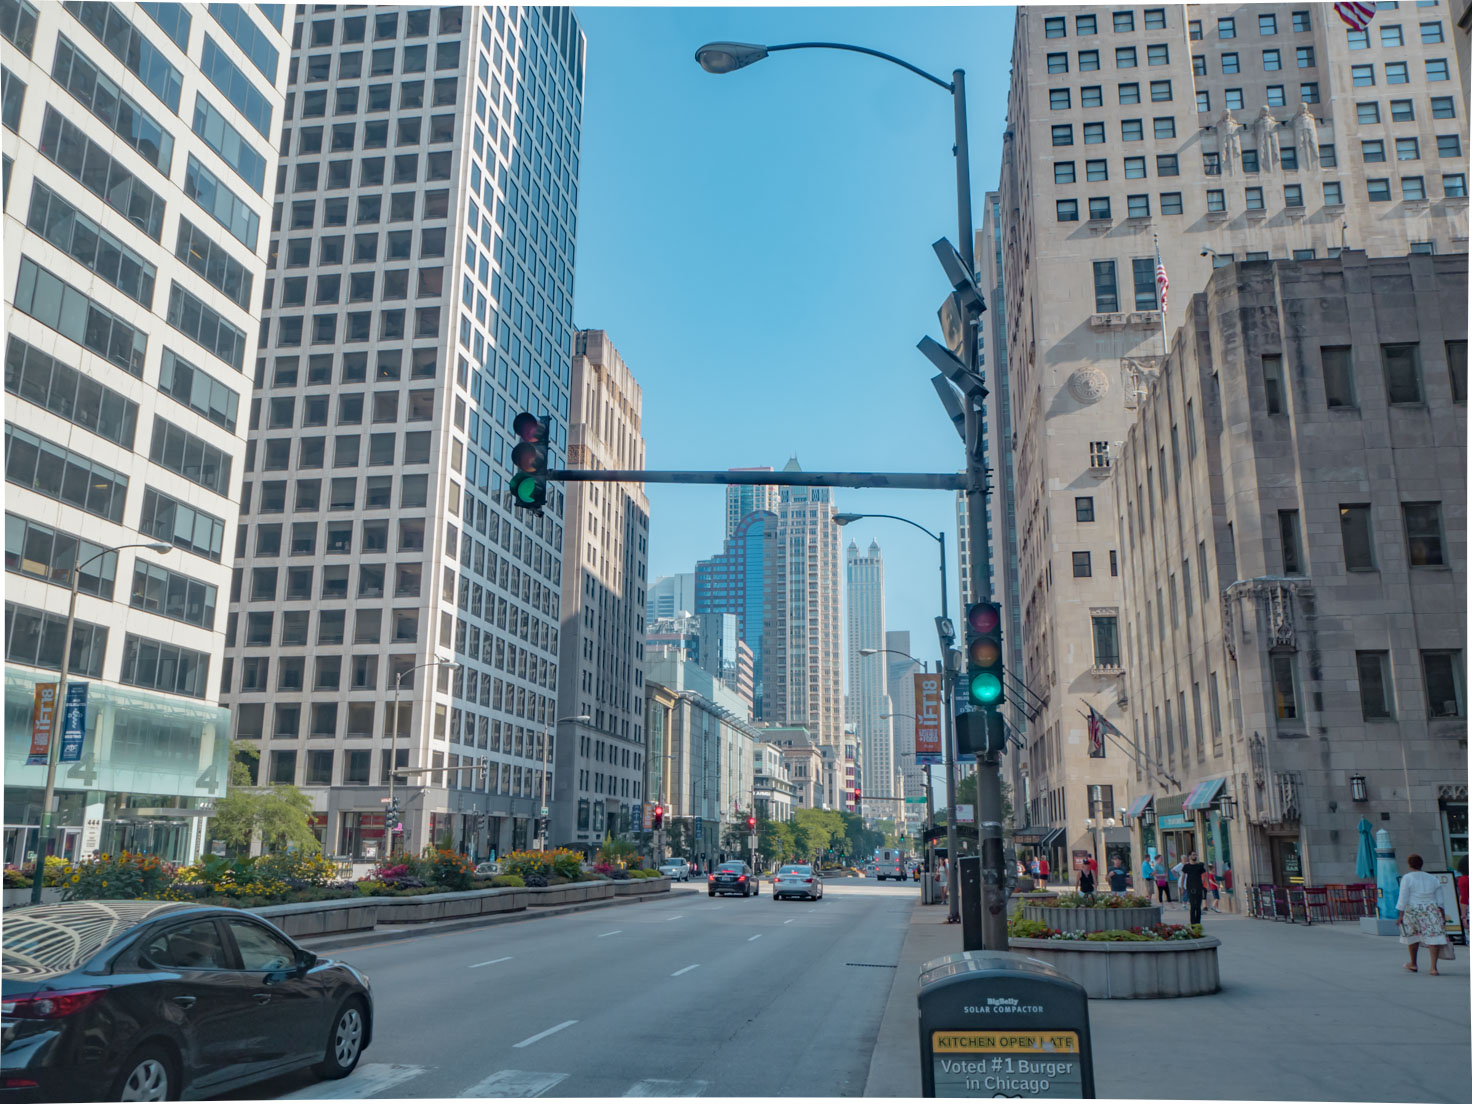 City mini guide to Chicago by Chic Journal blog